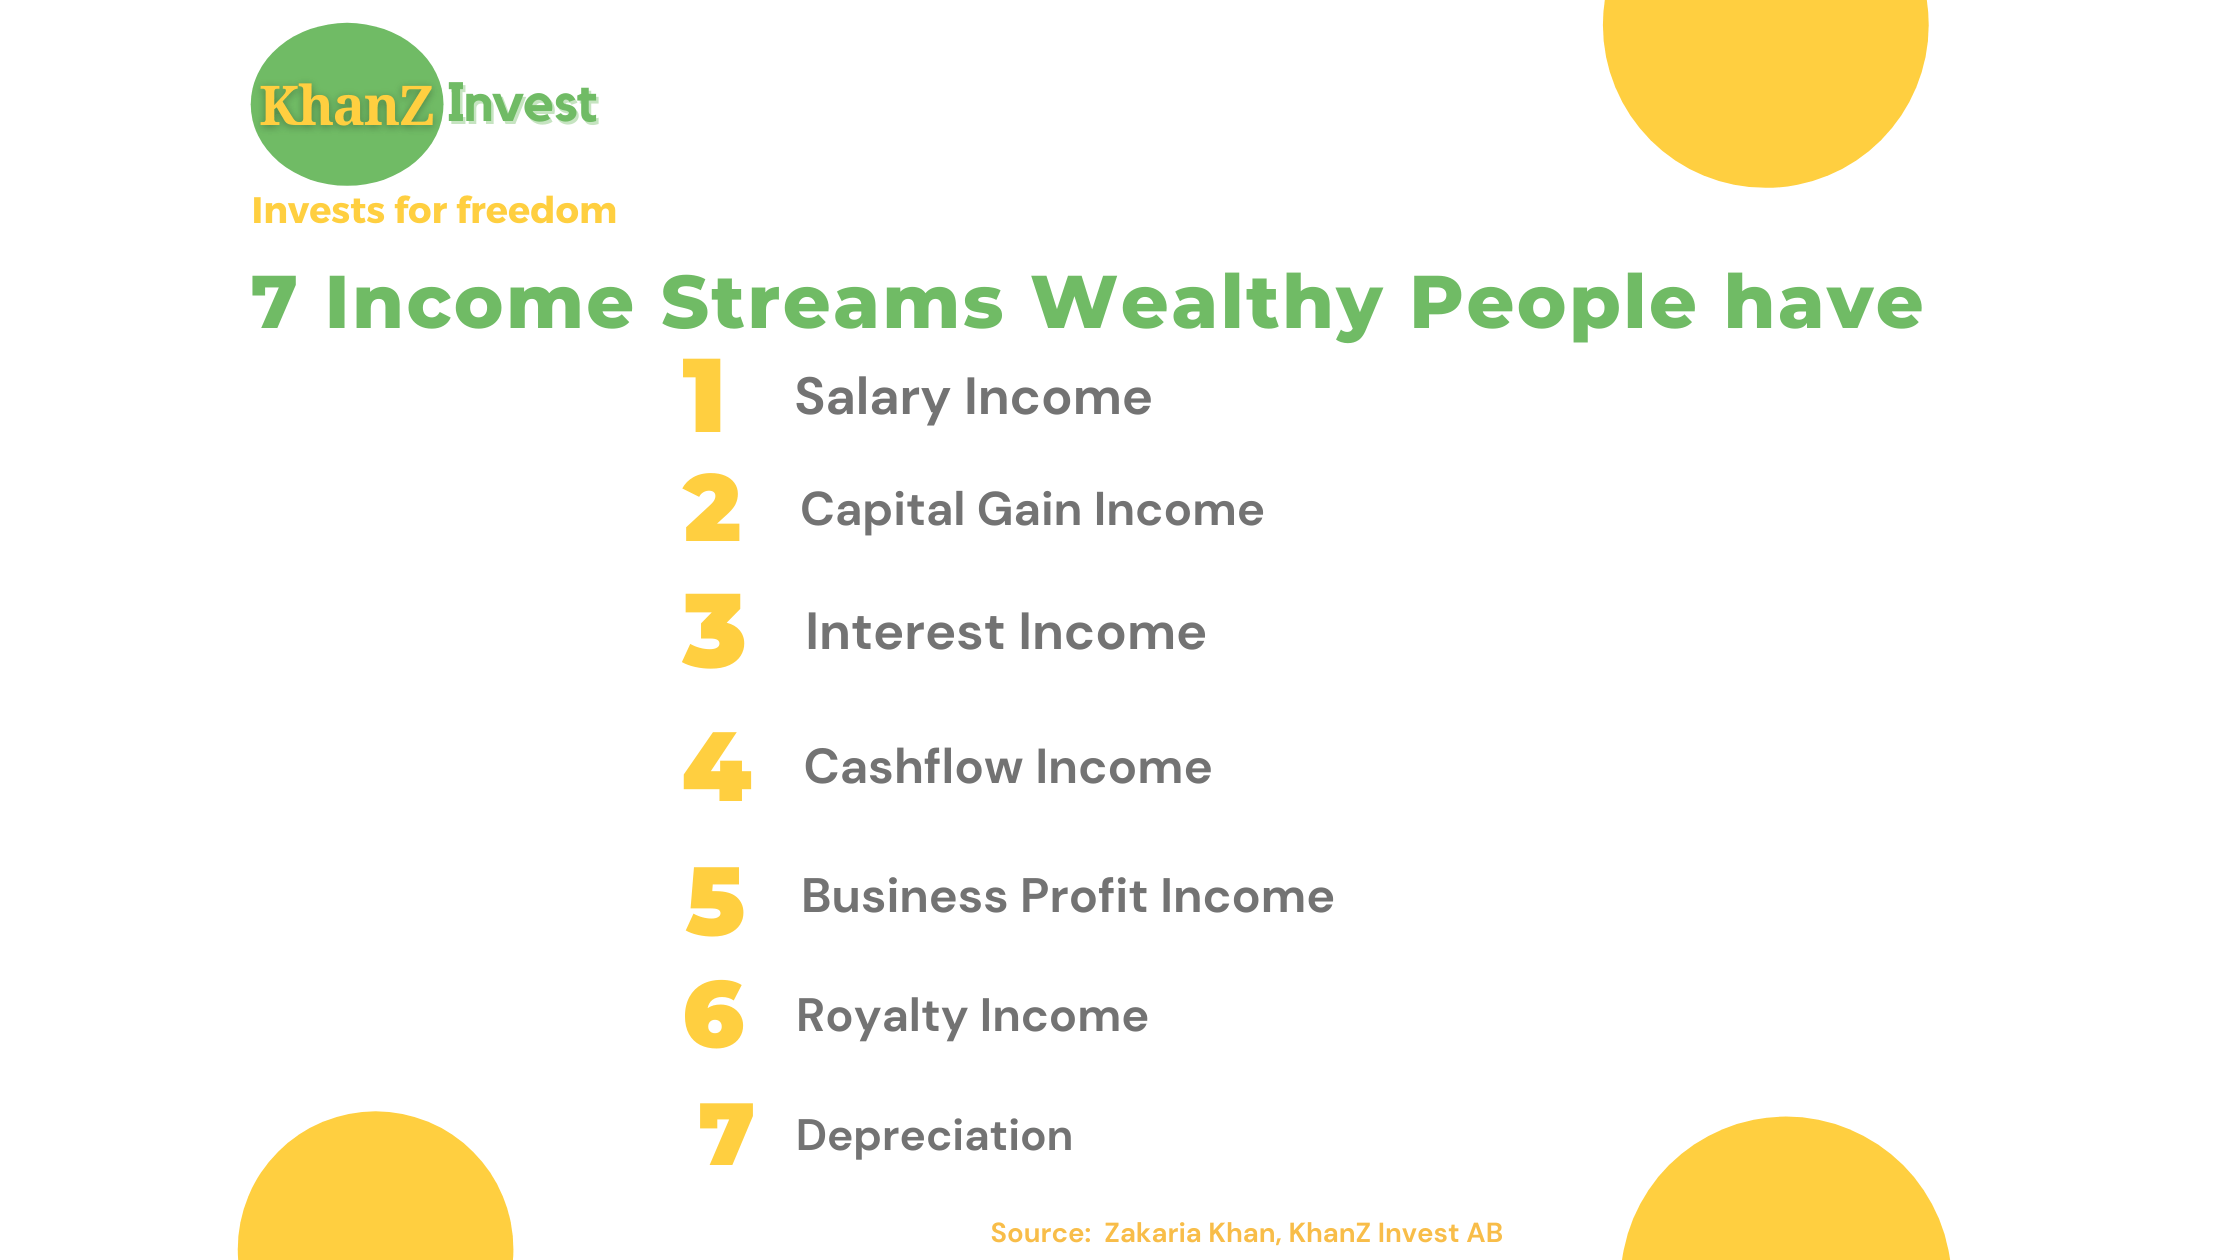 7 Income streams wealthy people have